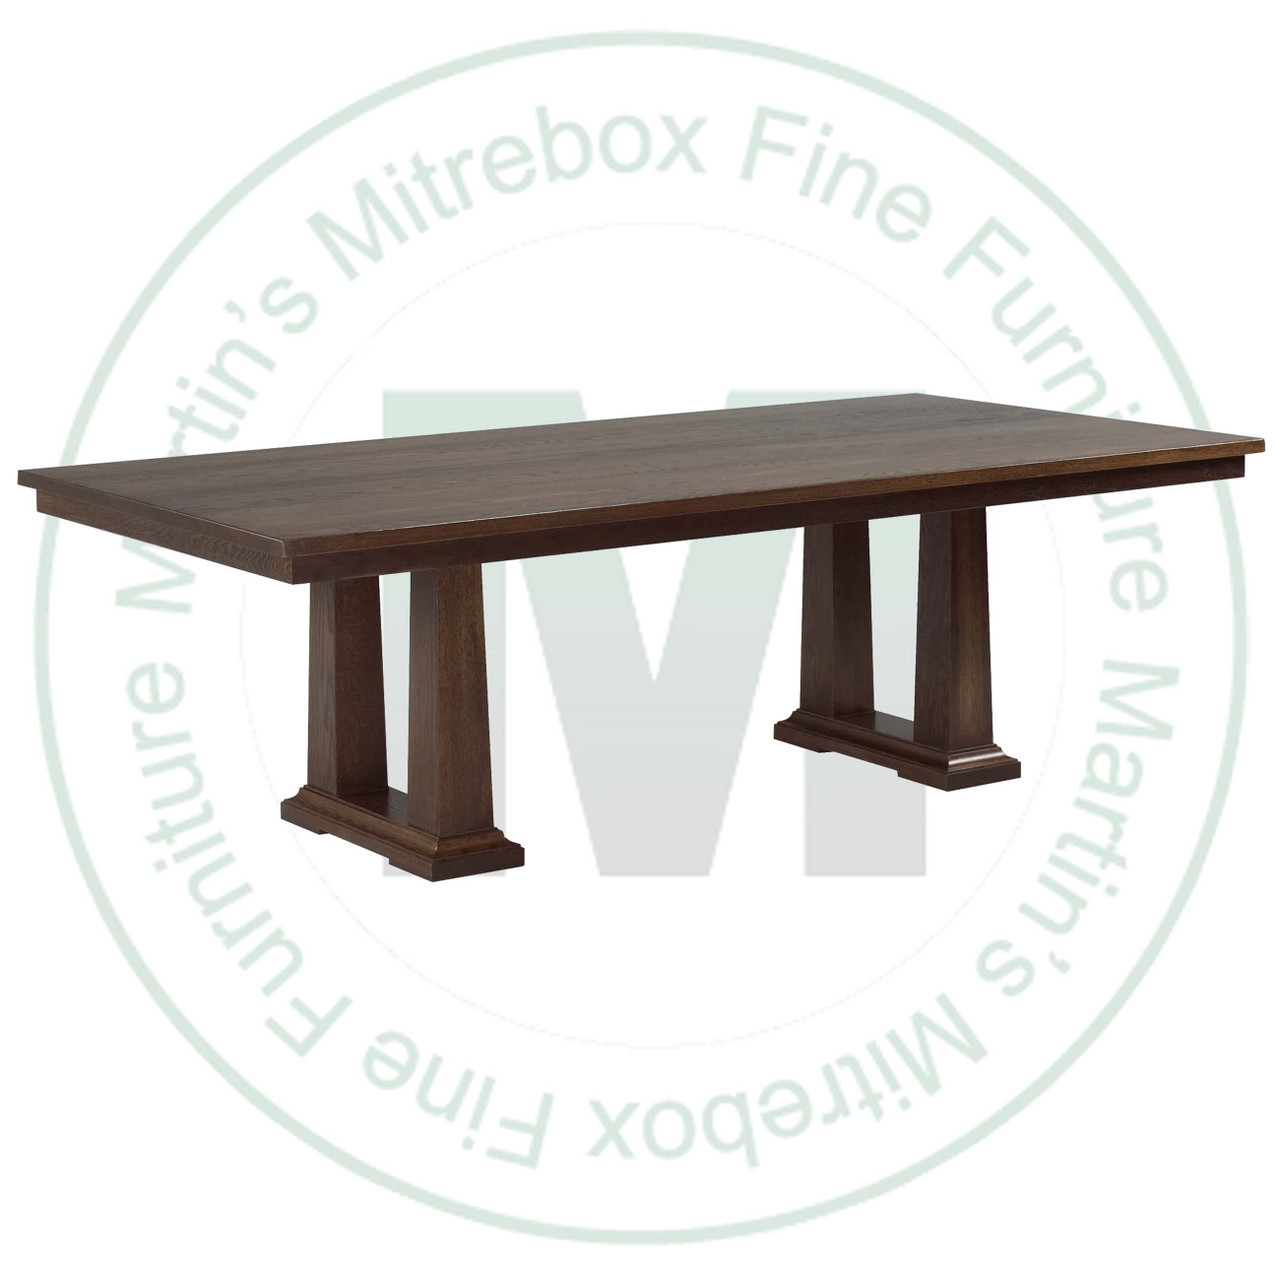 Maple Acropolis Solid Top Double Pedestal Table 54''D x 120''W x 30''H Table Has 1.75'' Thick Top And 2 - 16'' Extensions